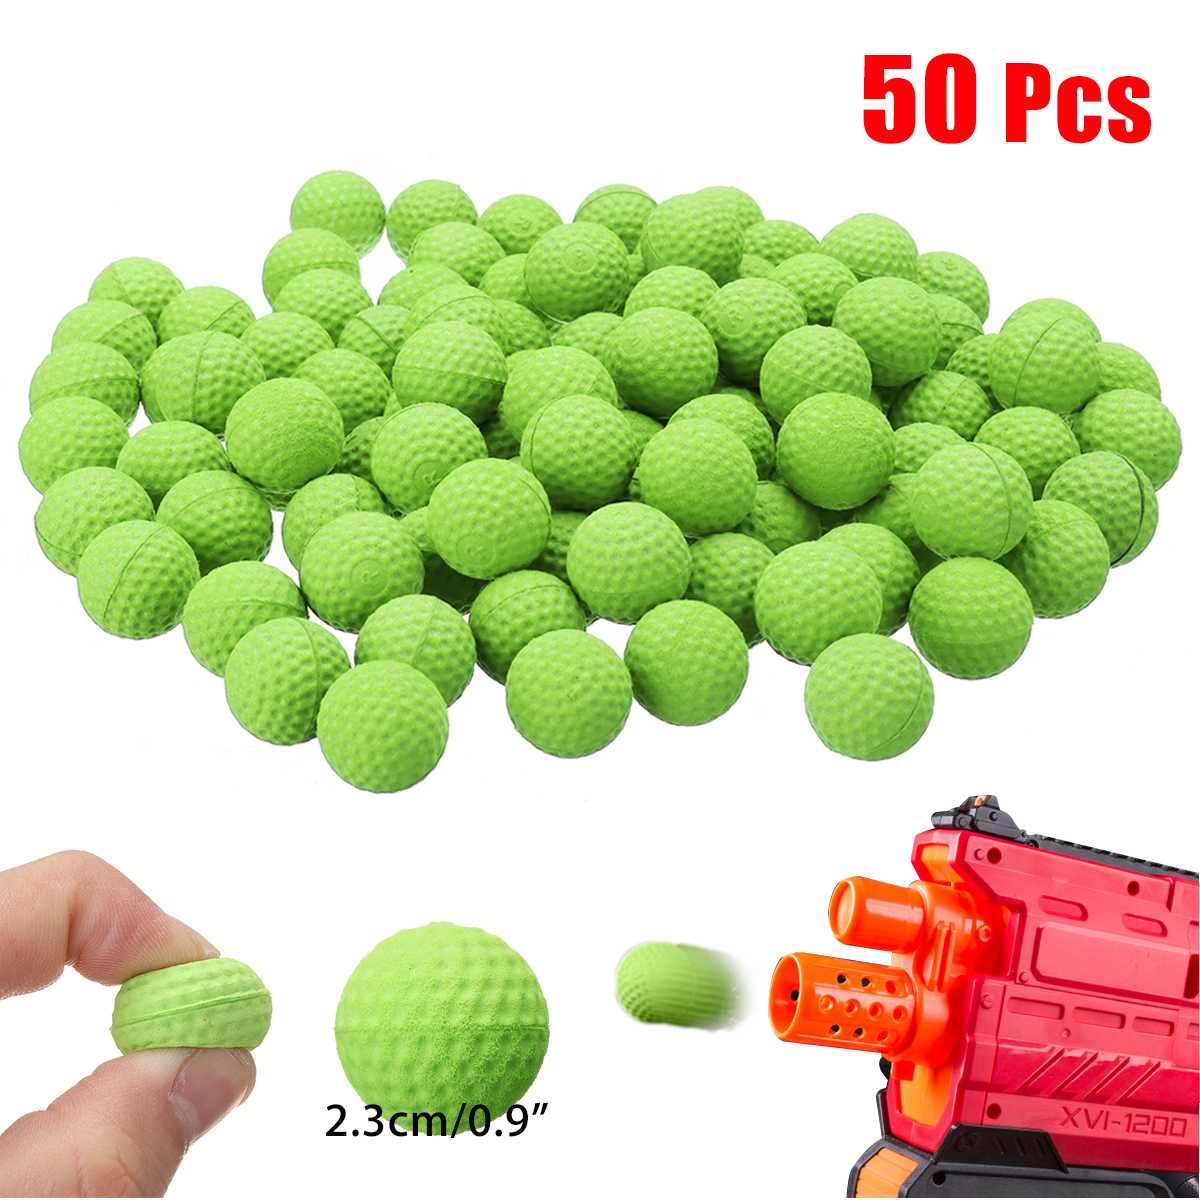 20Pcs EVA Soft Bullet Balls Rounds Compatible For Rival Apollo Child Toy BE 